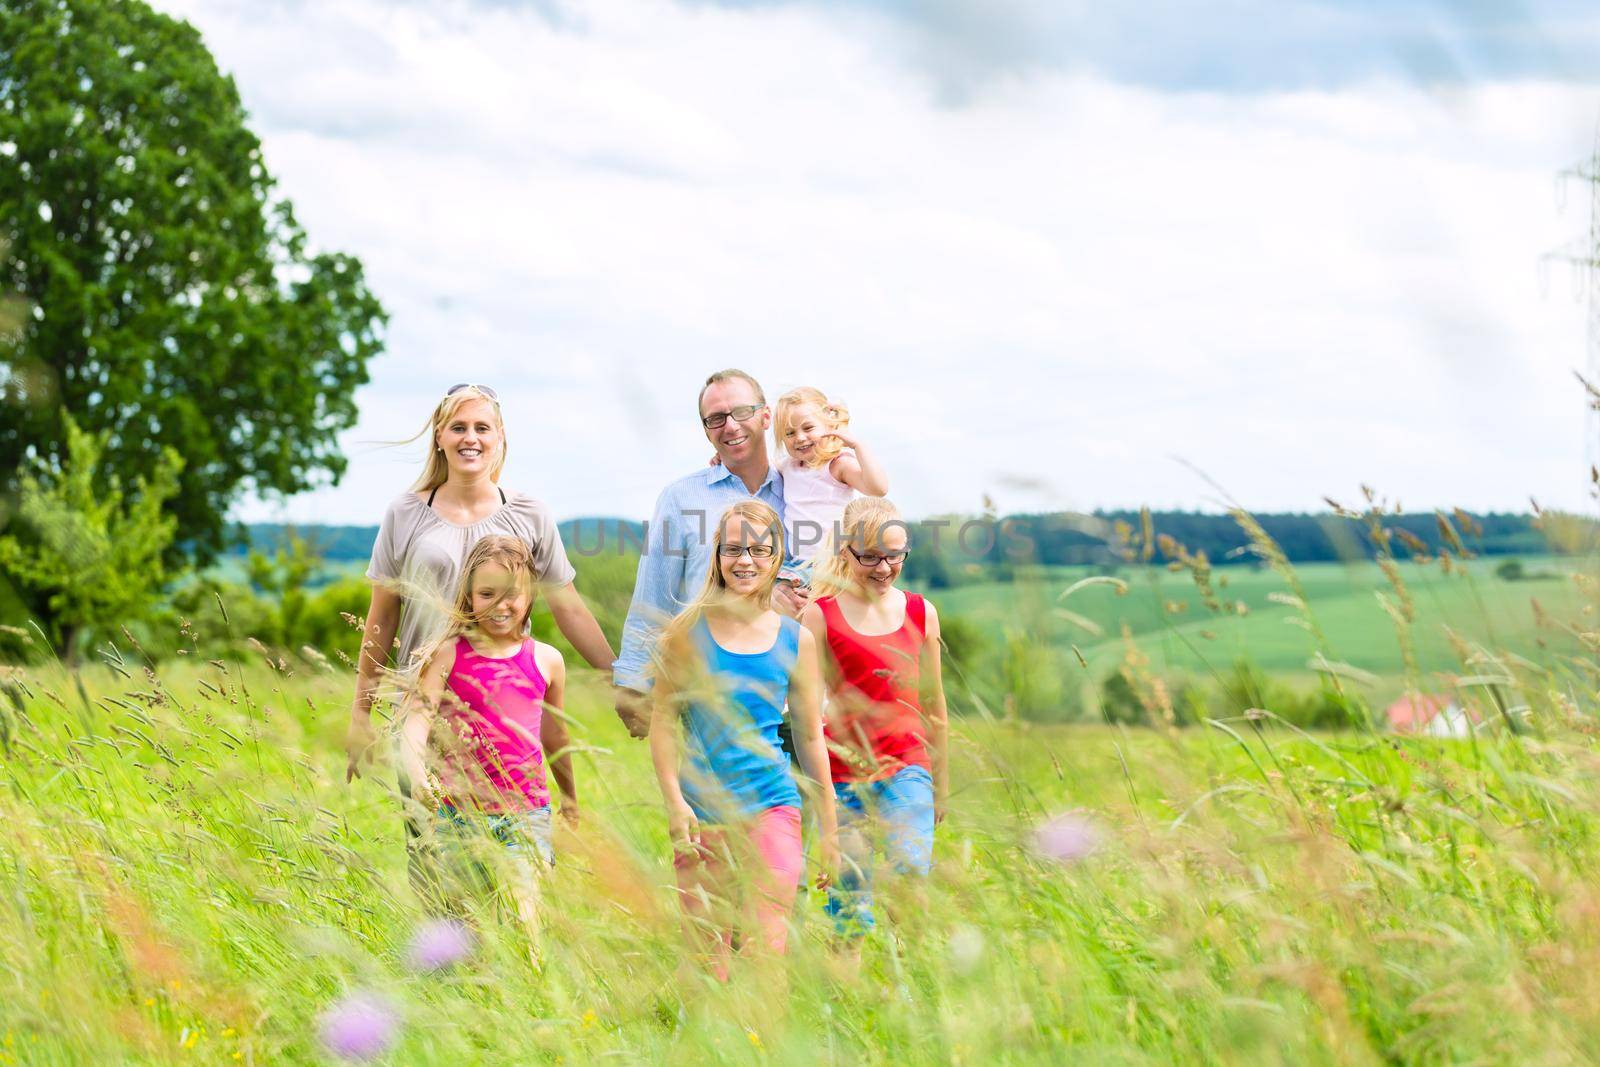 Happy Family with girls or daughters walking in a meadow in summer